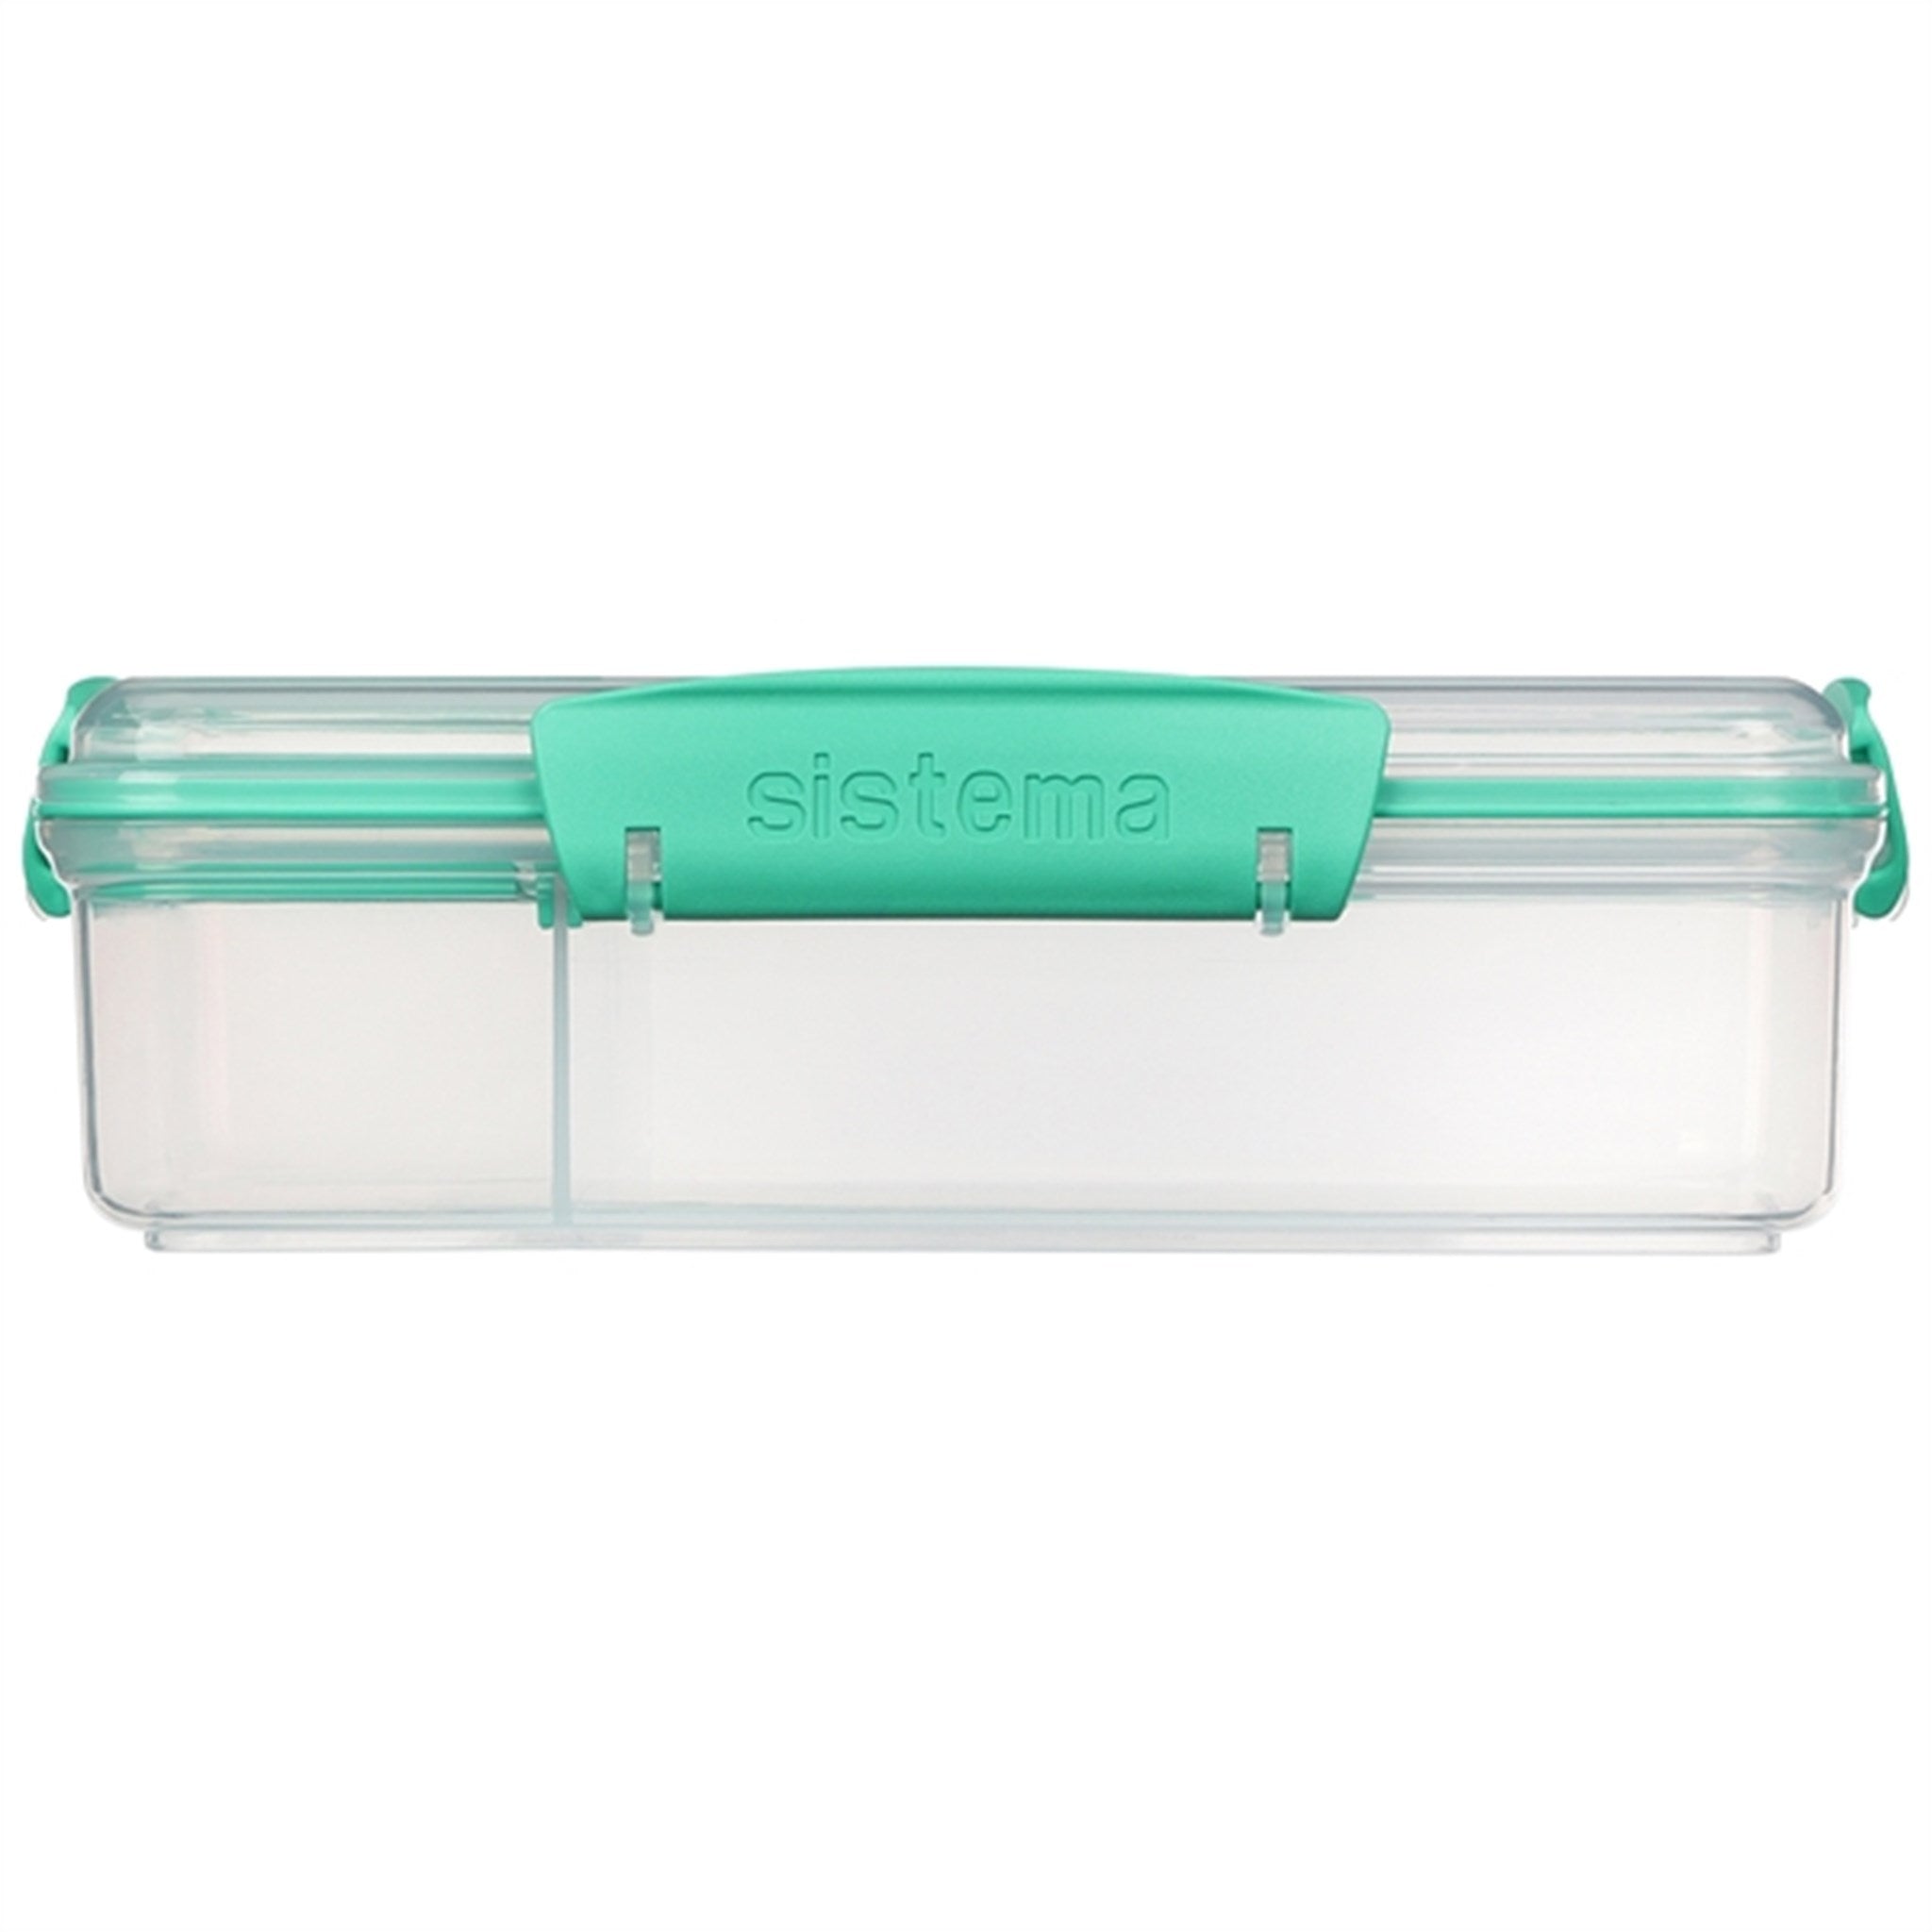 Sistema To Go Snack Attack Duo Lunchlåda 975 ml Minty Teal 2